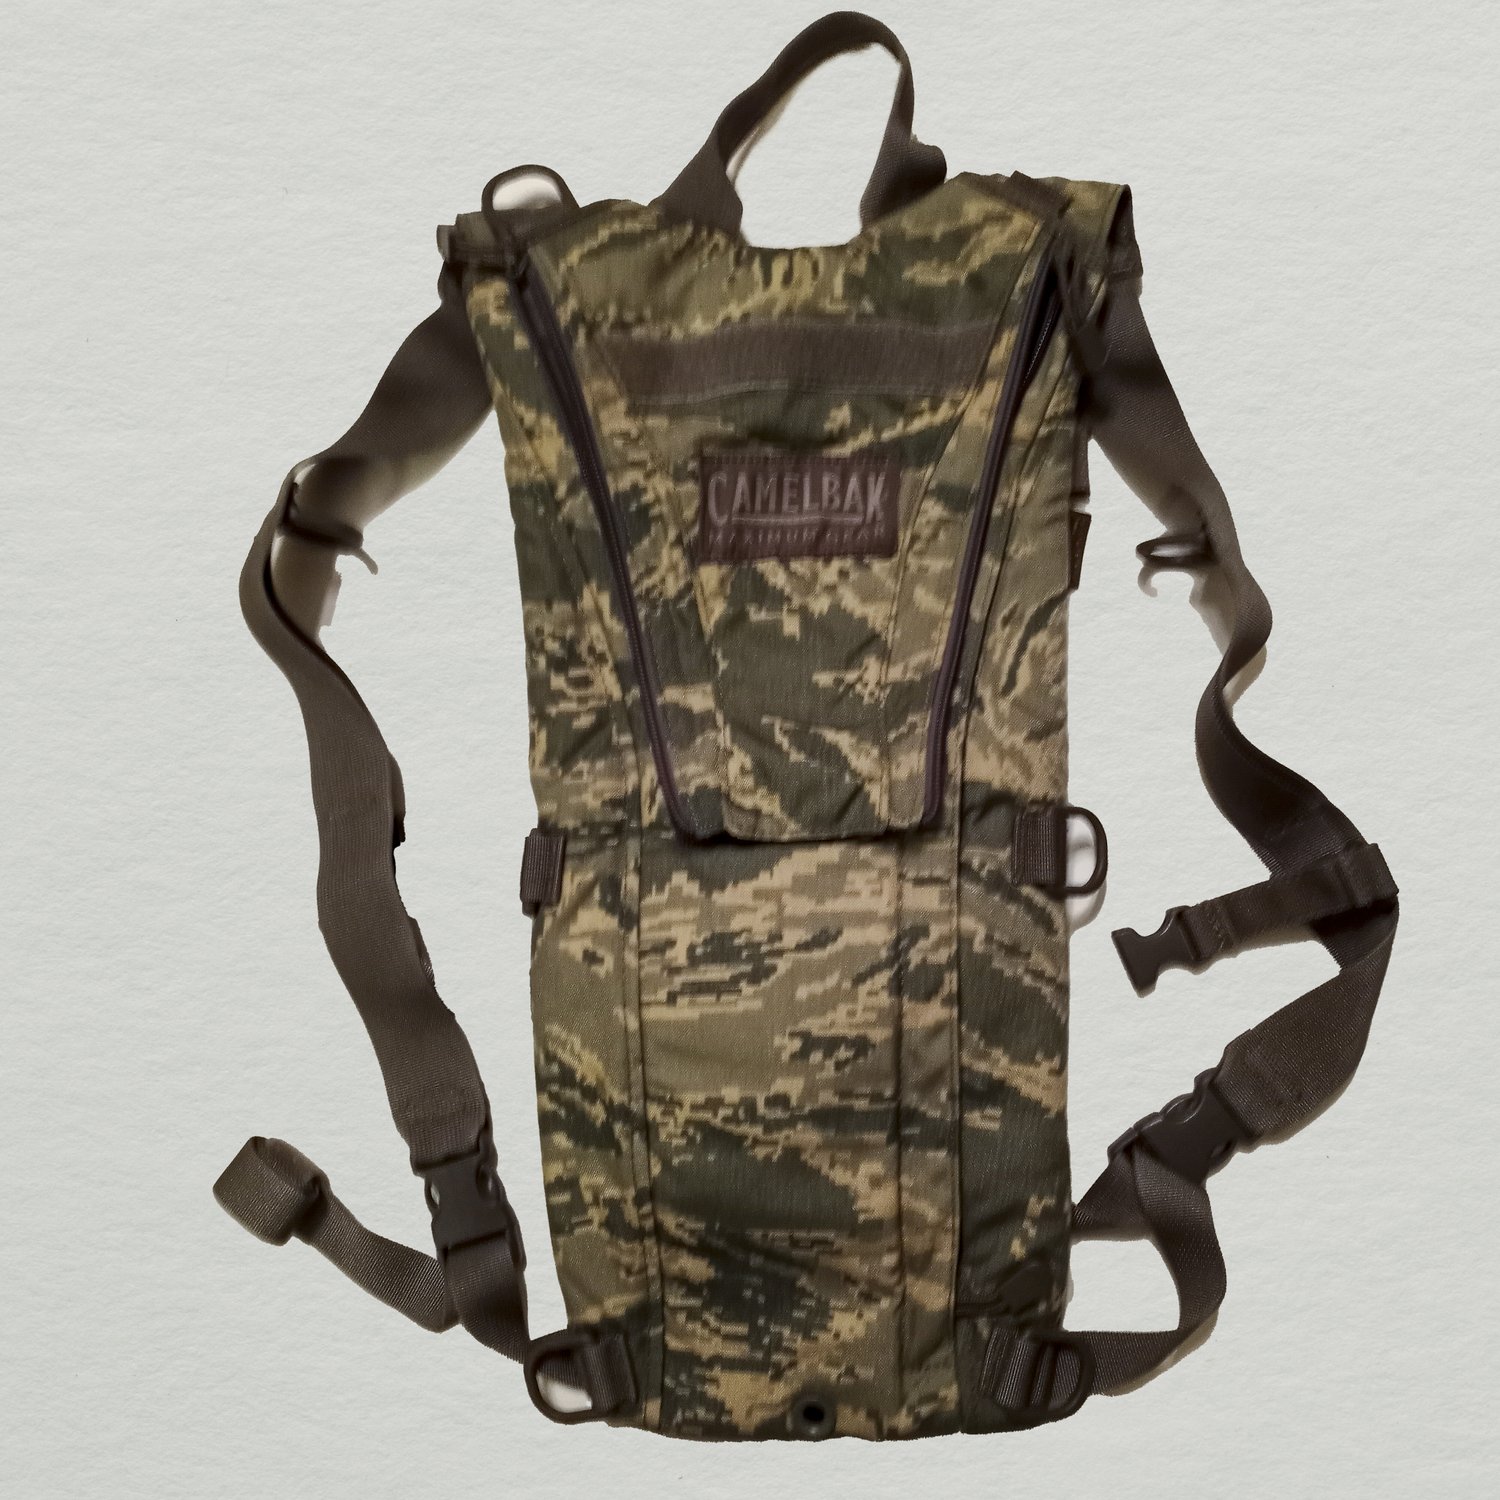 Camelbak Maximum Gear ACU Camo Air Force Pattern Hydration System Carrier Pack No bladder Camel City Supply